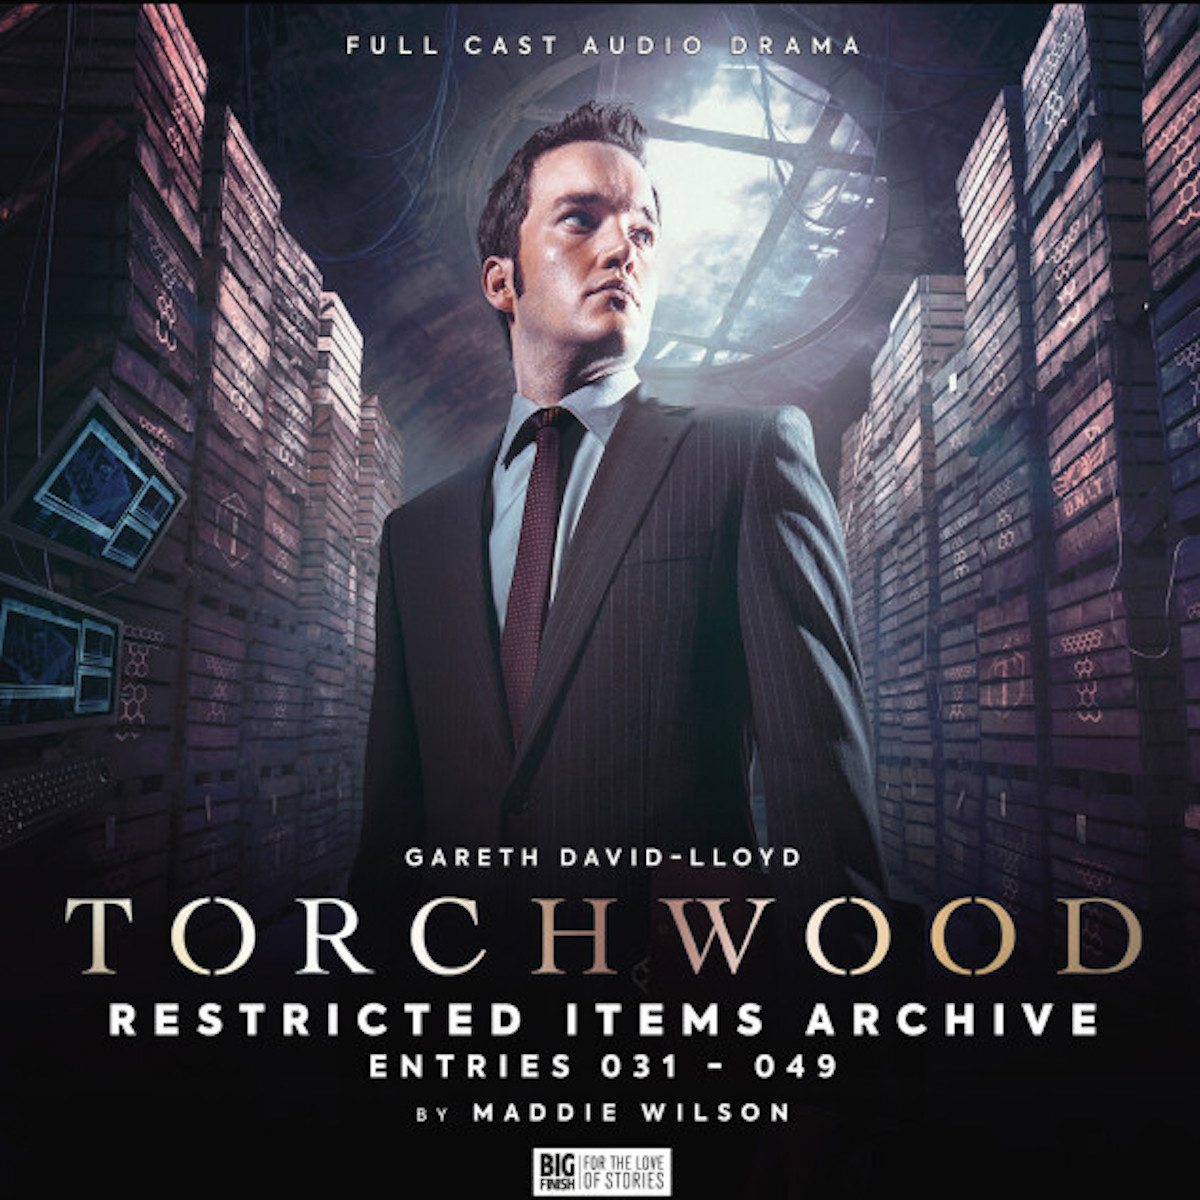 Torchwood: Restricted Items Archive Entries 031-049